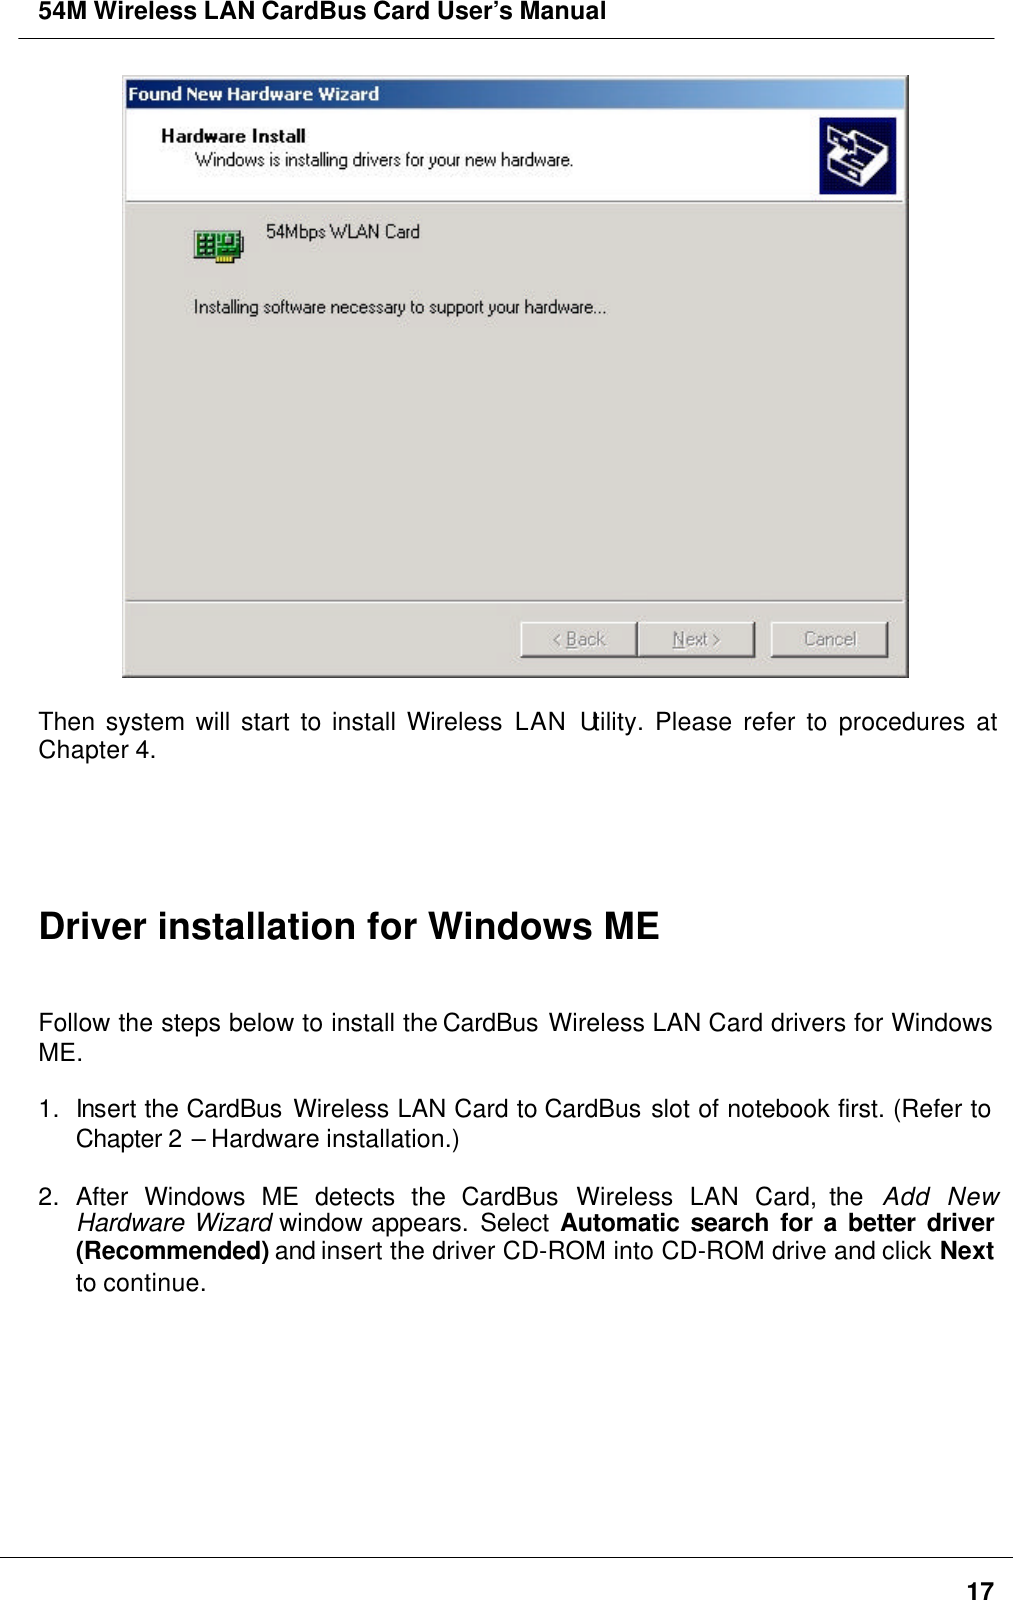 54M Wireless LAN CardBus Card User’s Manual17Then system will start to install Wireless LAN Utility. Please refer to procedures atChapter 4.Driver installation for Windows MEFollow the steps below to install the CardBus Wireless LAN Card drivers for WindowsME.1. Insert the CardBus Wireless LAN Card to CardBus slot of notebook first. (Refer toChapter 2 – Hardware installation.)2. After Windows ME detects the CardBus Wireless LAN Card, the  Add NewHardware Wizard window appears. Select  Automatic search for a better driver(Recommended) and insert the driver CD-ROM into CD-ROM drive and click Nextto continue.